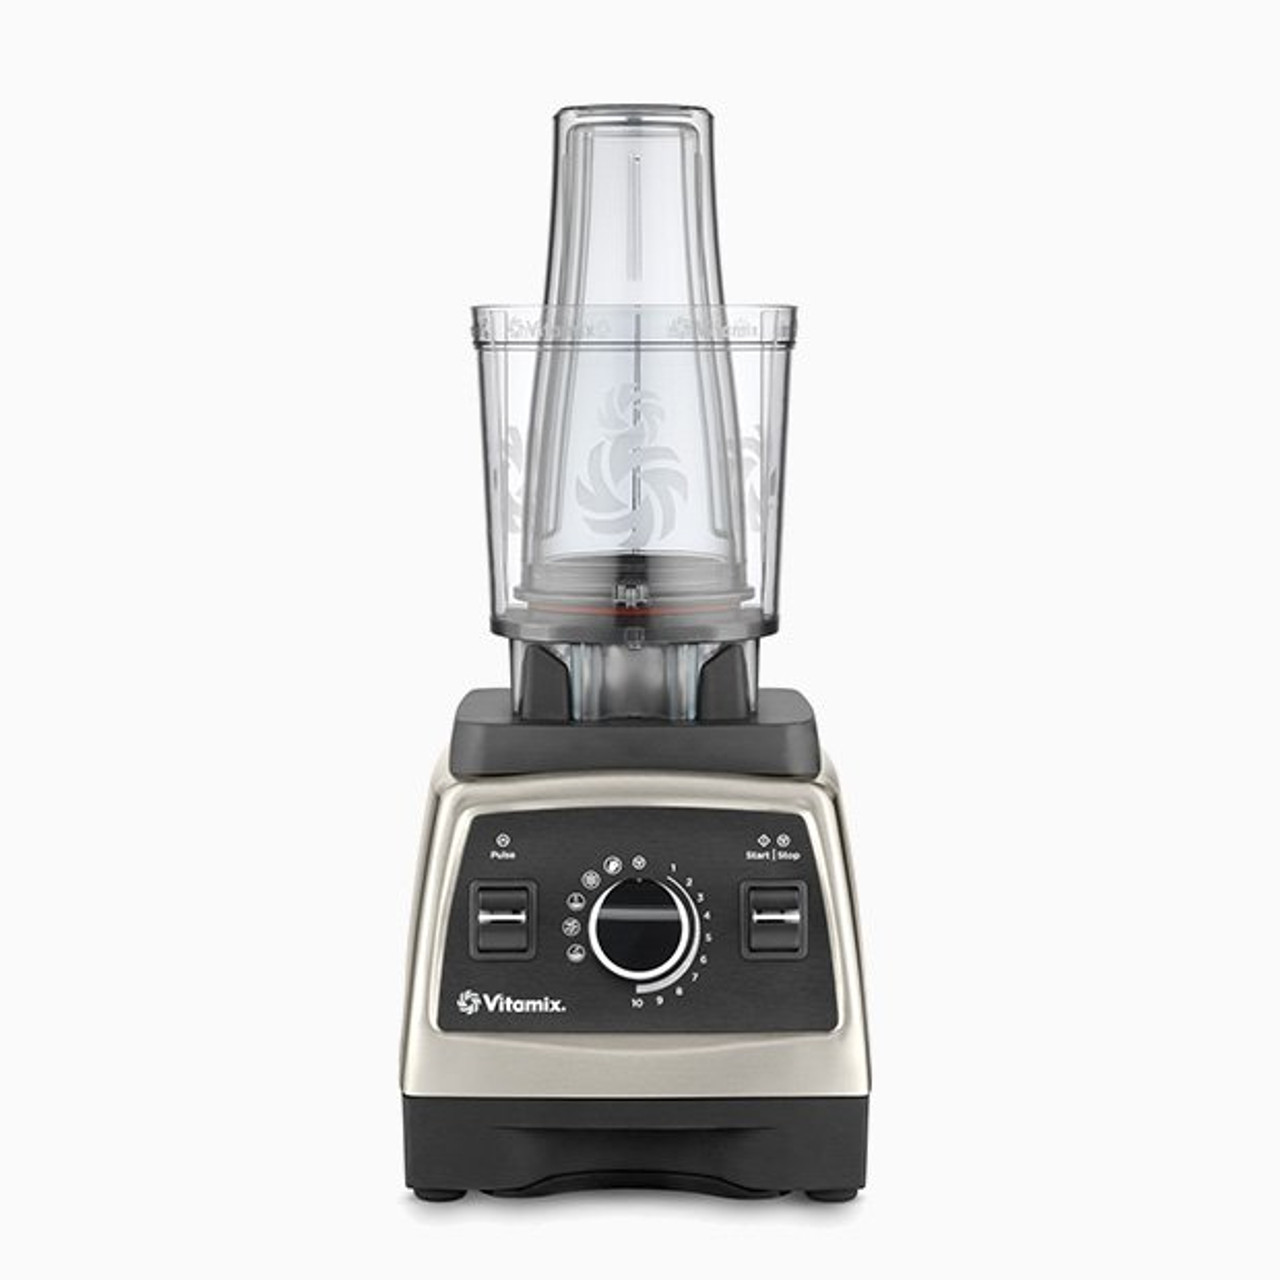 https://cdn11.bigcommerce.com/s-hccytny0od/images/stencil/1280x1280/products/1604/5639/vitamix-personal-cup-adapter-1__97930.1532036759.jpg?c=2?imbypass=on